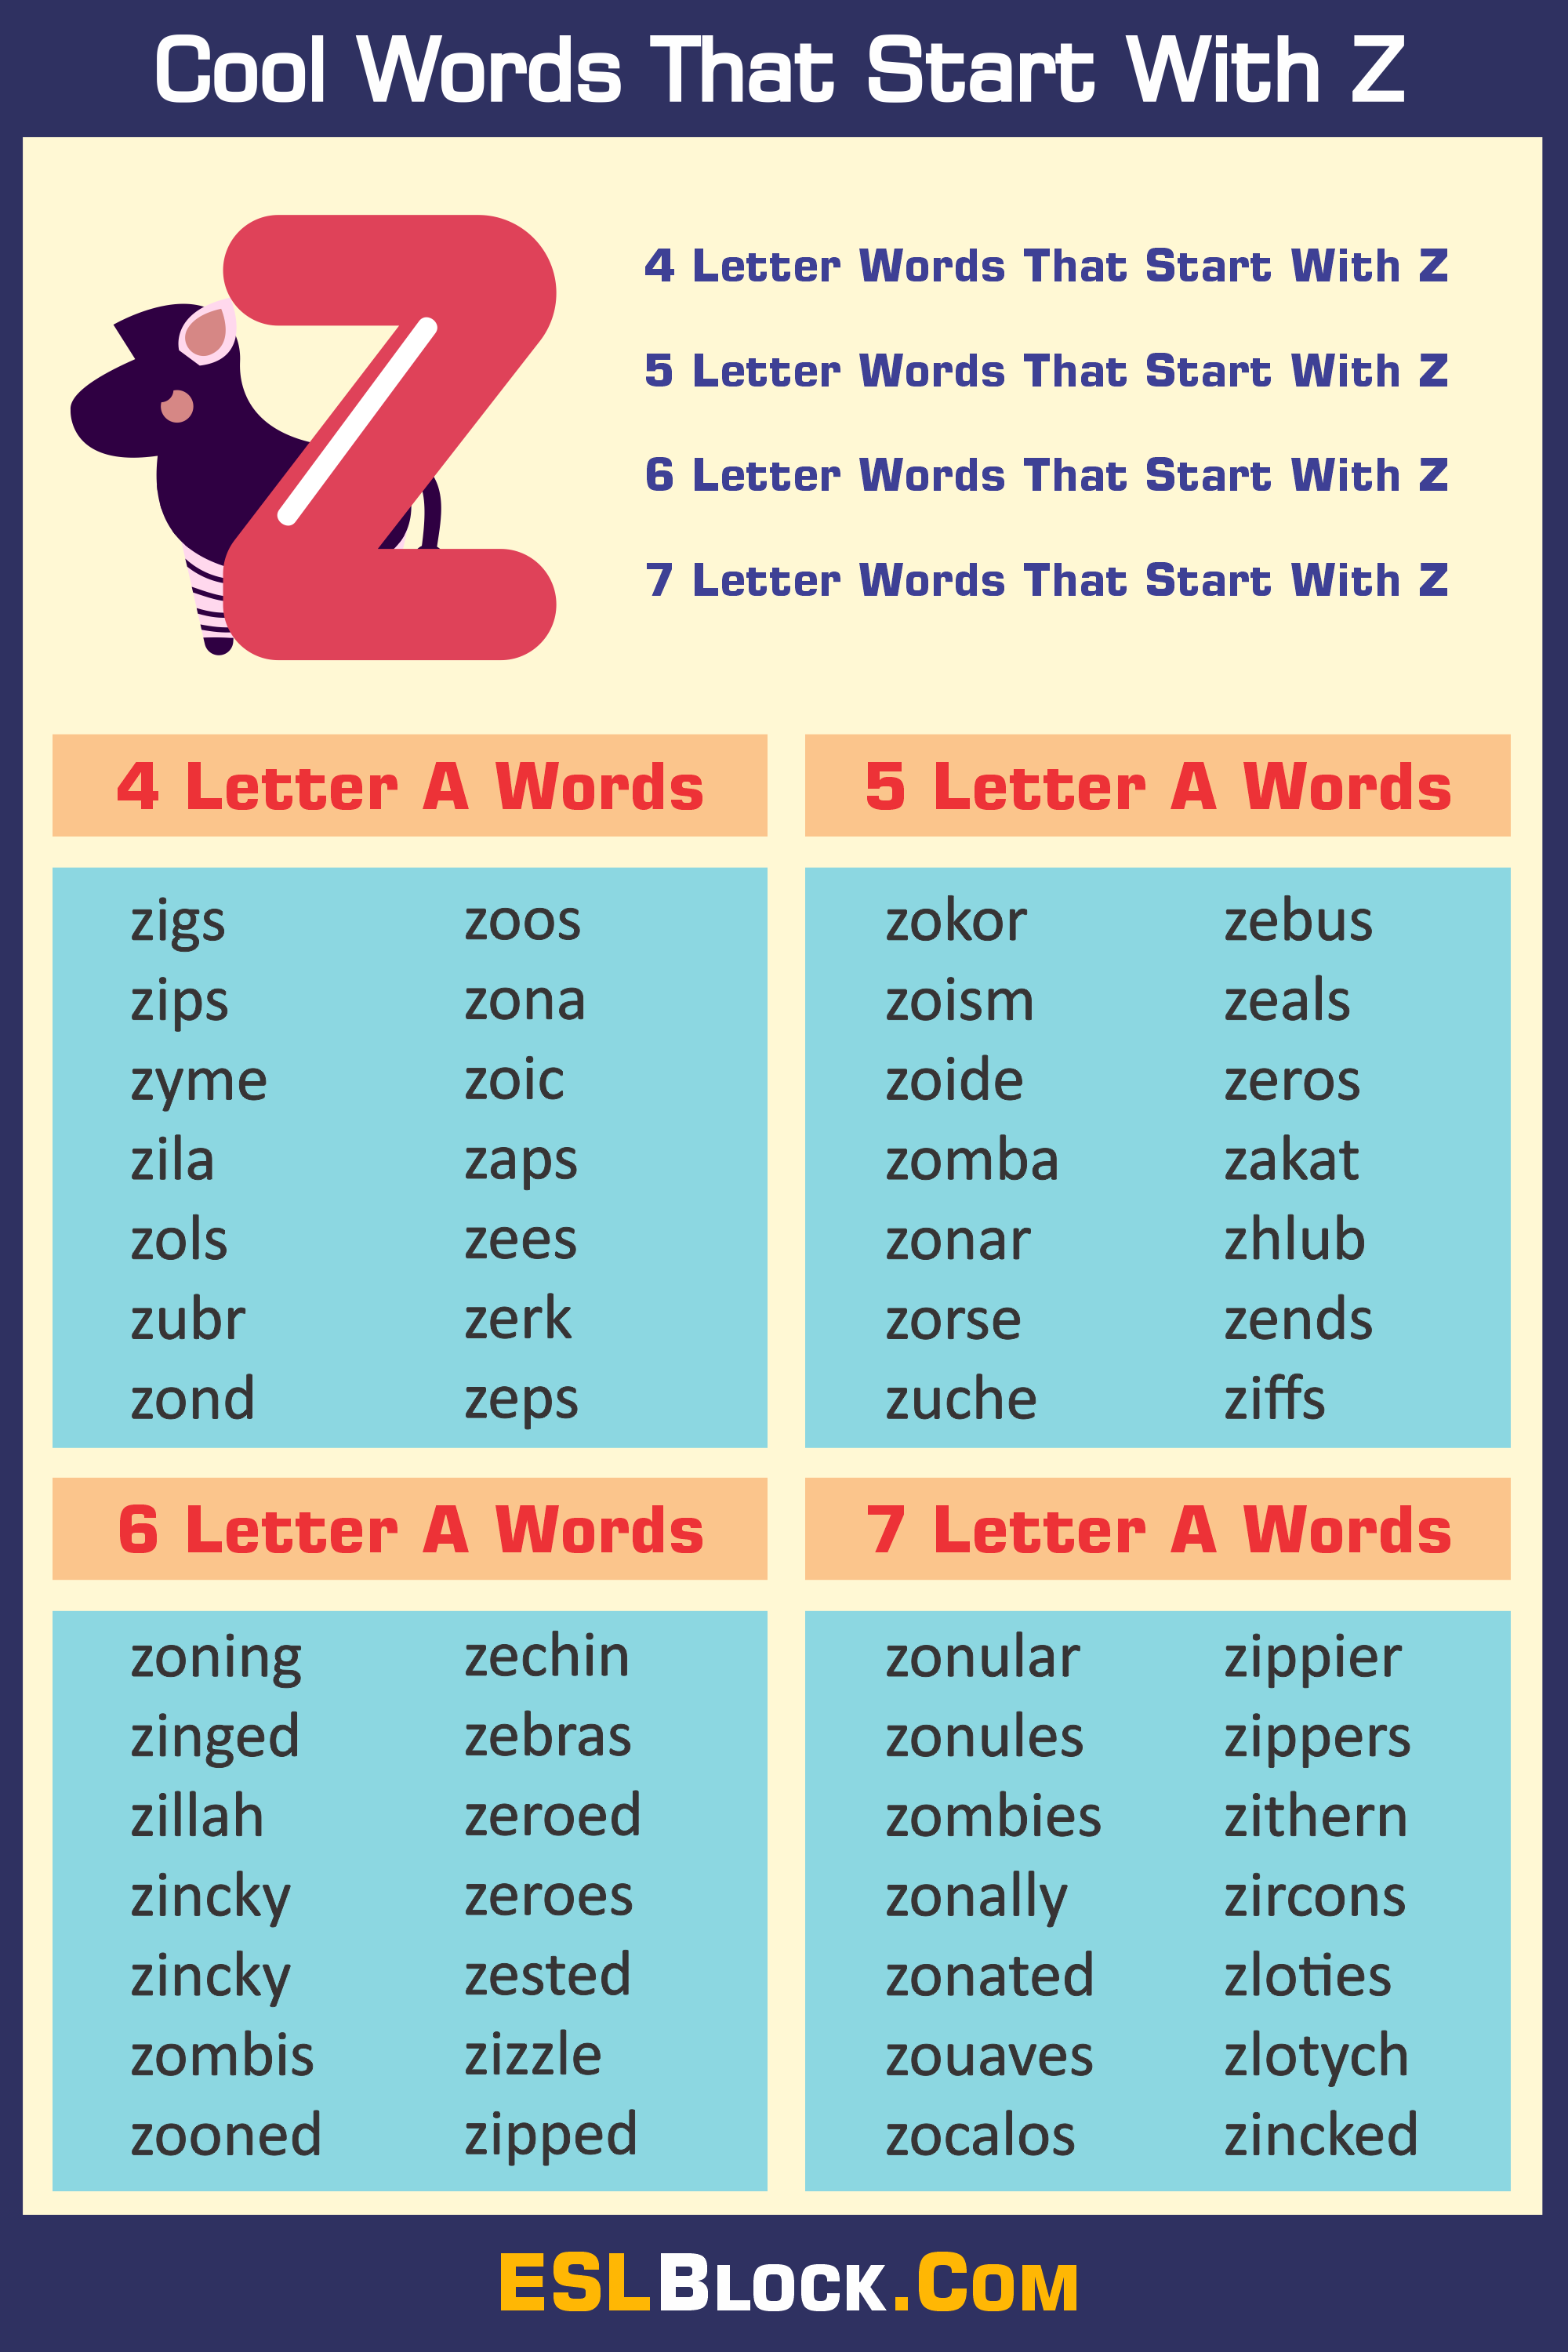 4 Letter Words, 4 Letter Words That Start With Z, 5 Letter Words, 5 Letter Words That Start With Z, 6 Letter Words, 6 Letter Words That Start With Z, 7 Letter Words, 7 Letter Words That Start With Z, Awesome Cool Words, Christmas Words That Start With Z, Cool Words, Describing Words That Start With Z, Descriptive Words That Start With Z, English Words, Five Letter Words Starting with Z, Good Words That Start With Z, Nice Words That Start With Z, Positive Words That Start With Z, Unique Words, Word Dictionary, Words That Start With Z, Words That Start With Z to Describe Someone, Z Words